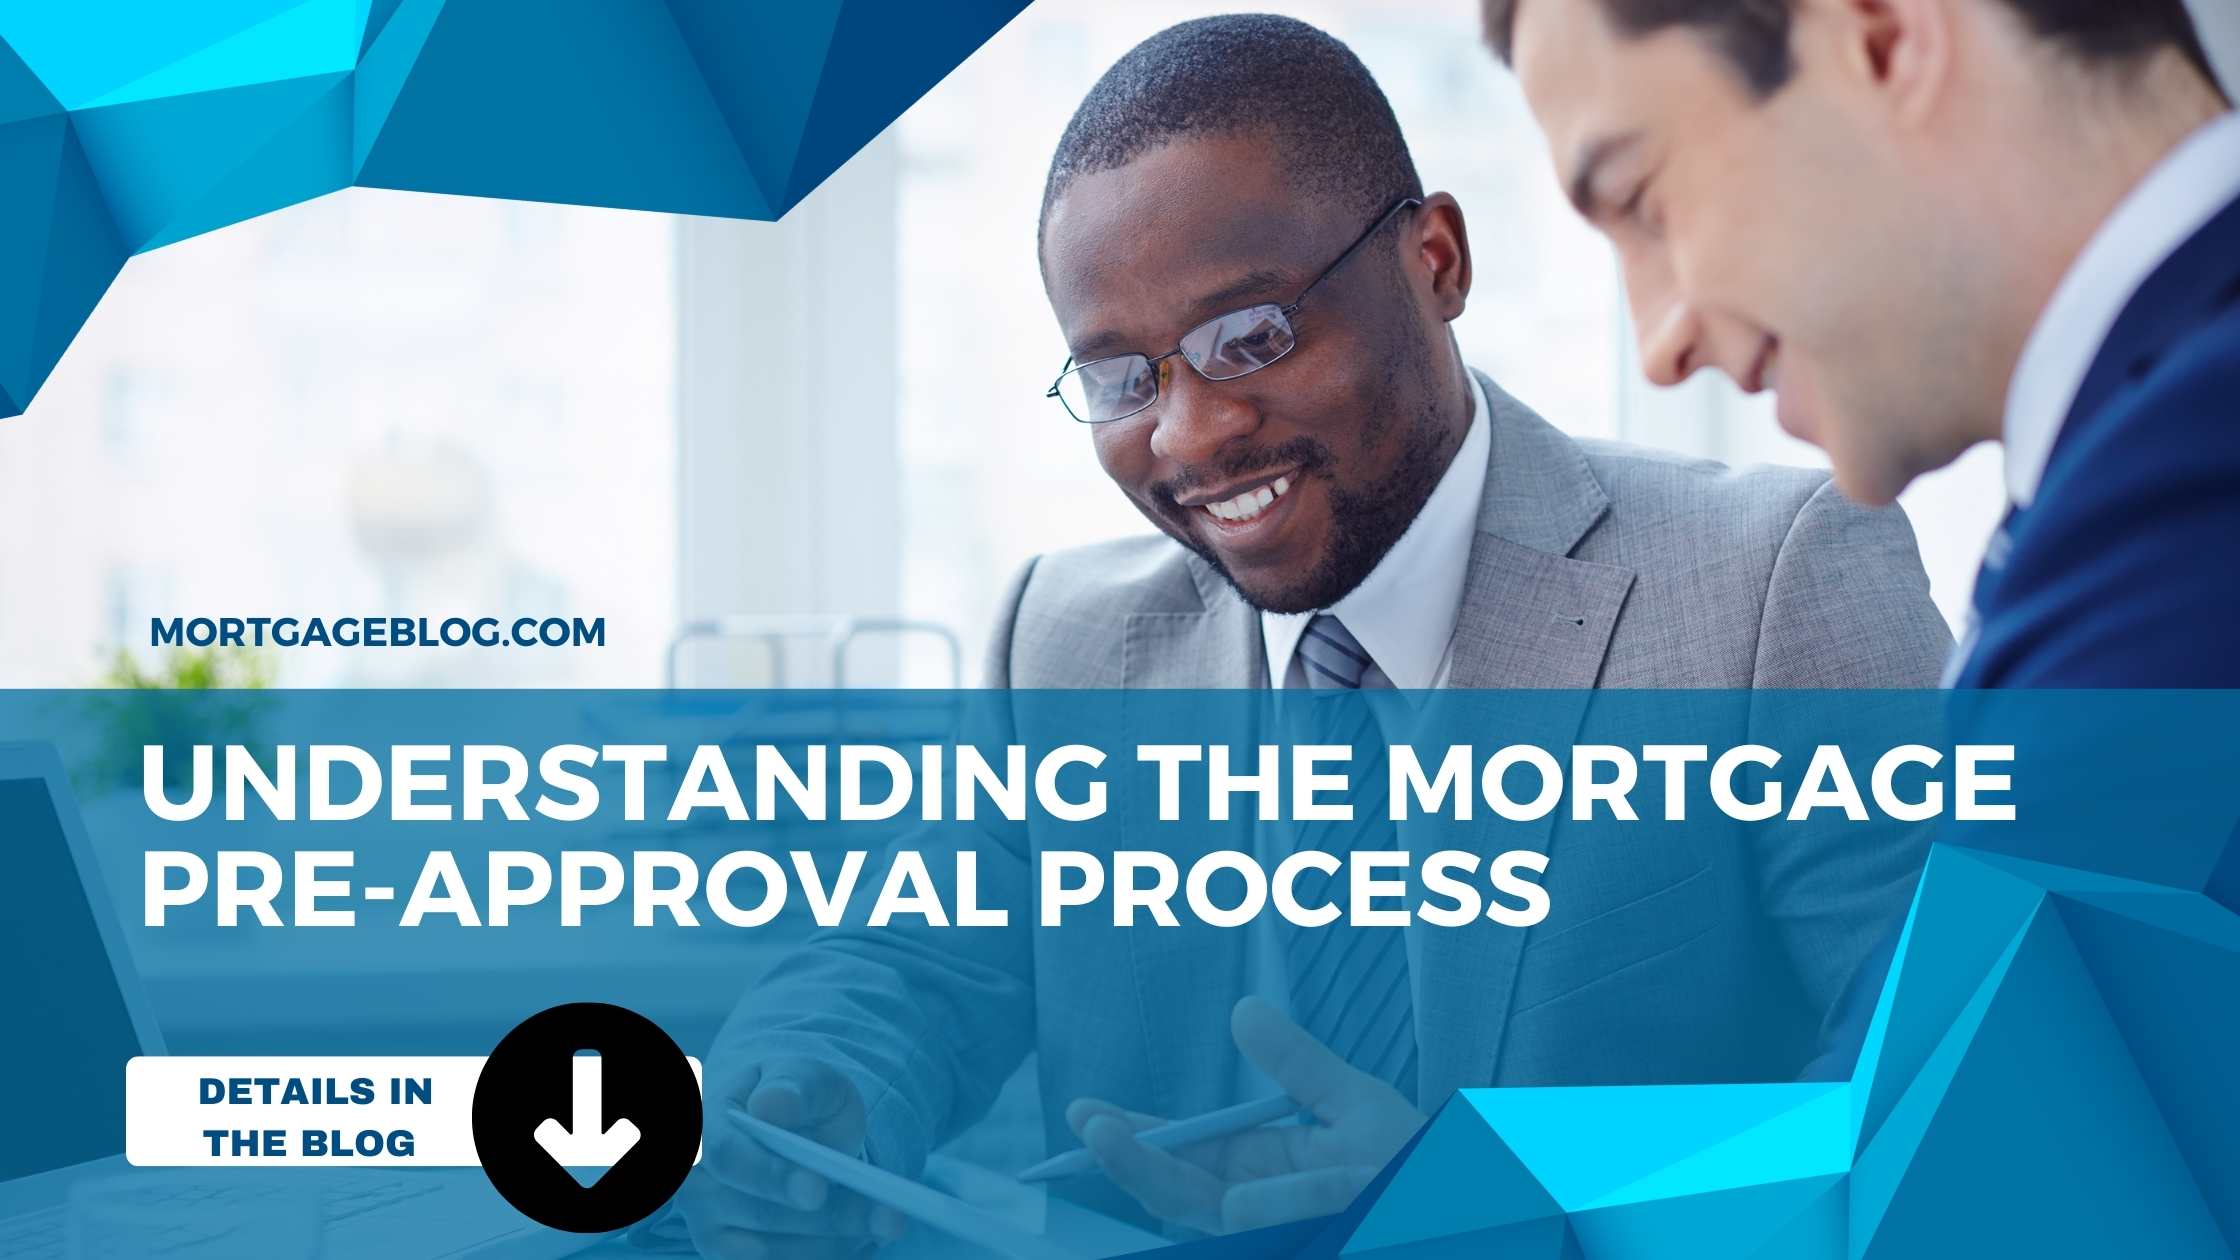 mortgage pre approval process and pre approval letter